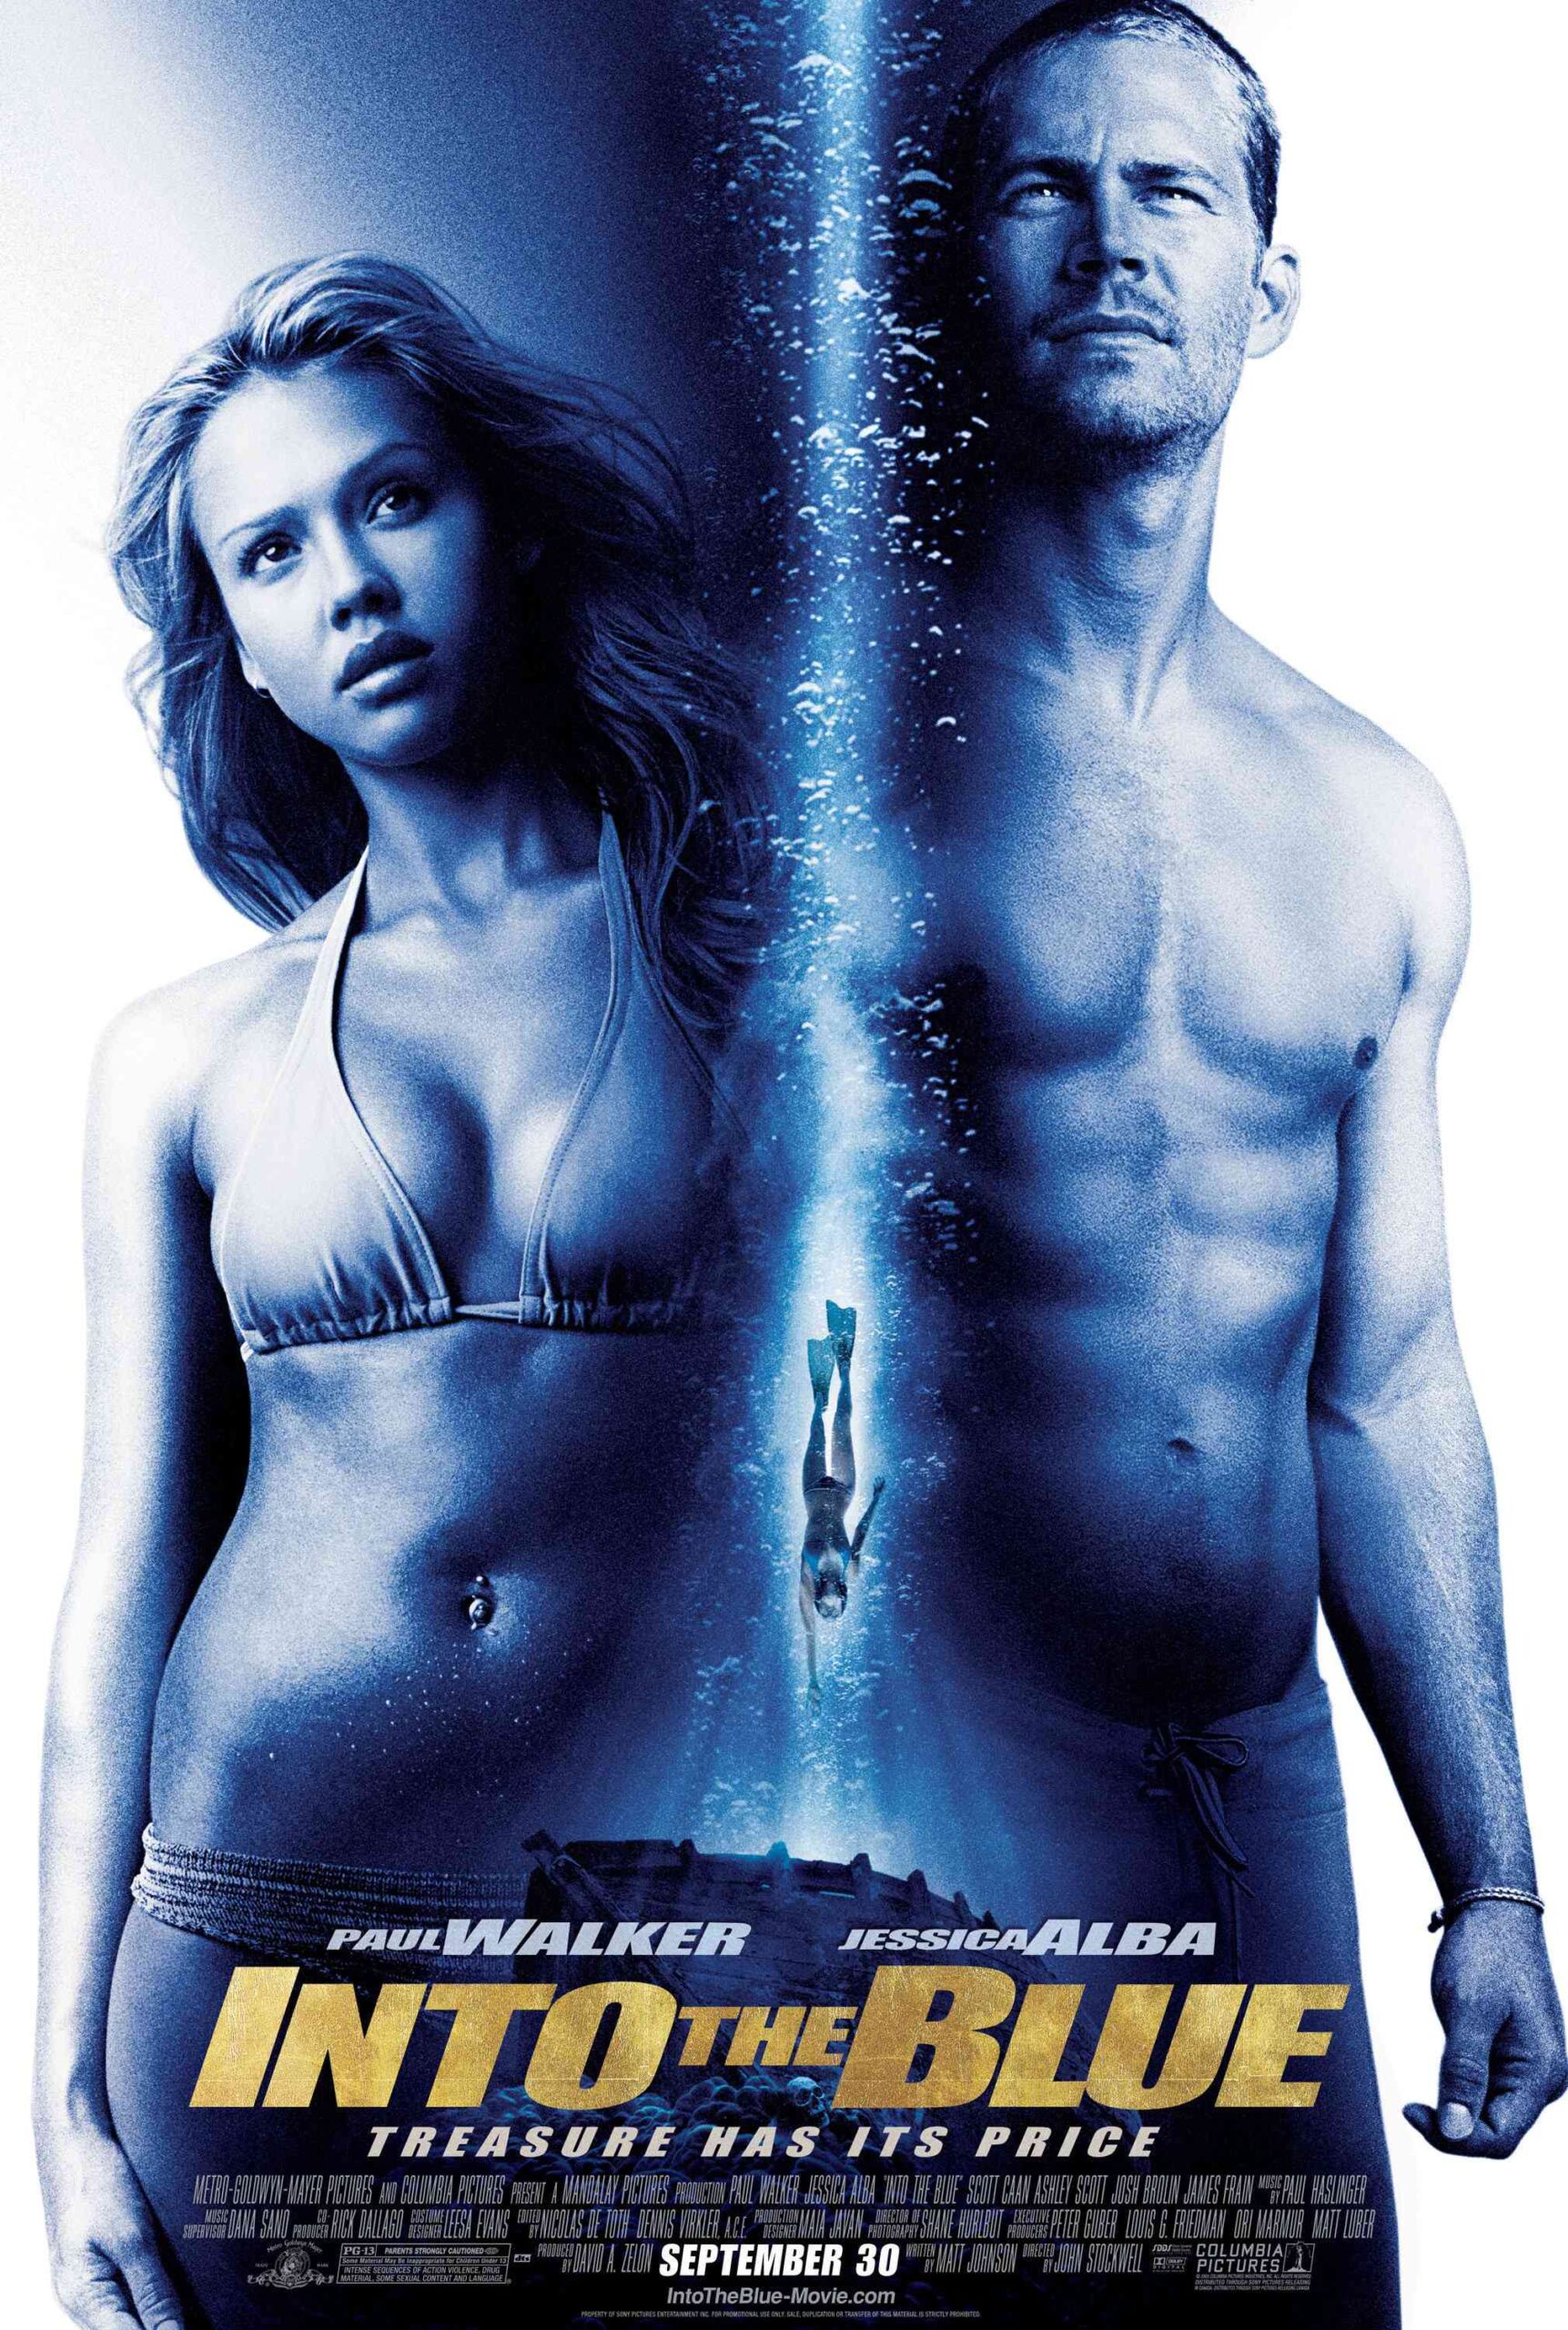 FULL MOVIE: Into The Blue (2005)